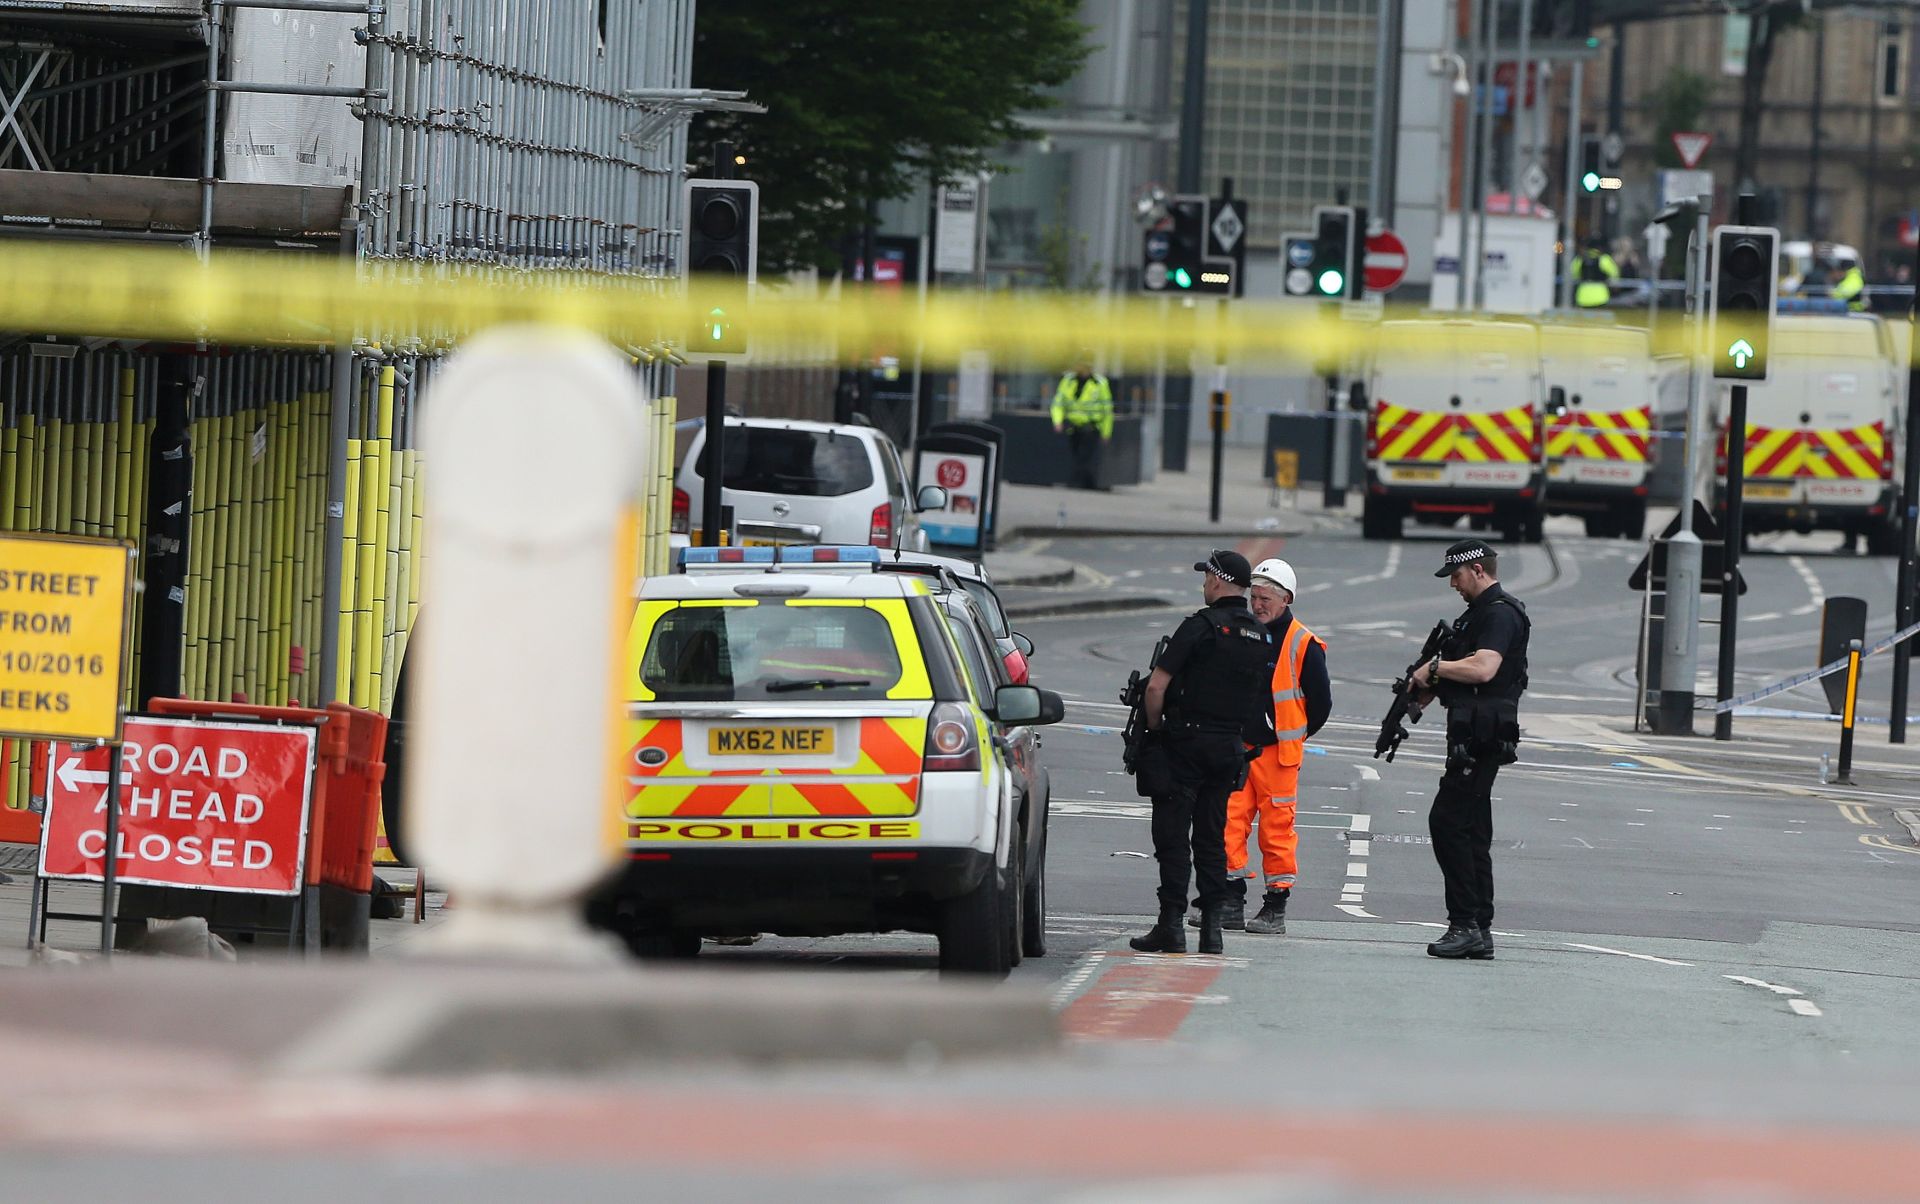 epa05982797 Armed police patrol the Manchester Arena in Manchester, Britain, 23 May 2017. According to a statement by the Greater Manchester Police, at least 22 people have been confirmed dead and around 59 others were injured, in an explosion at the Manchester Arena on the night of 22 May at the end of a concert by US singer Ariana Grande. Police believe that the explosion, which is being treated as a terrorist incident, was carried out by a single man using an improvised explosive device (IED), who was confirmed dead at the scene.  EPA/NIGEL RODDIS